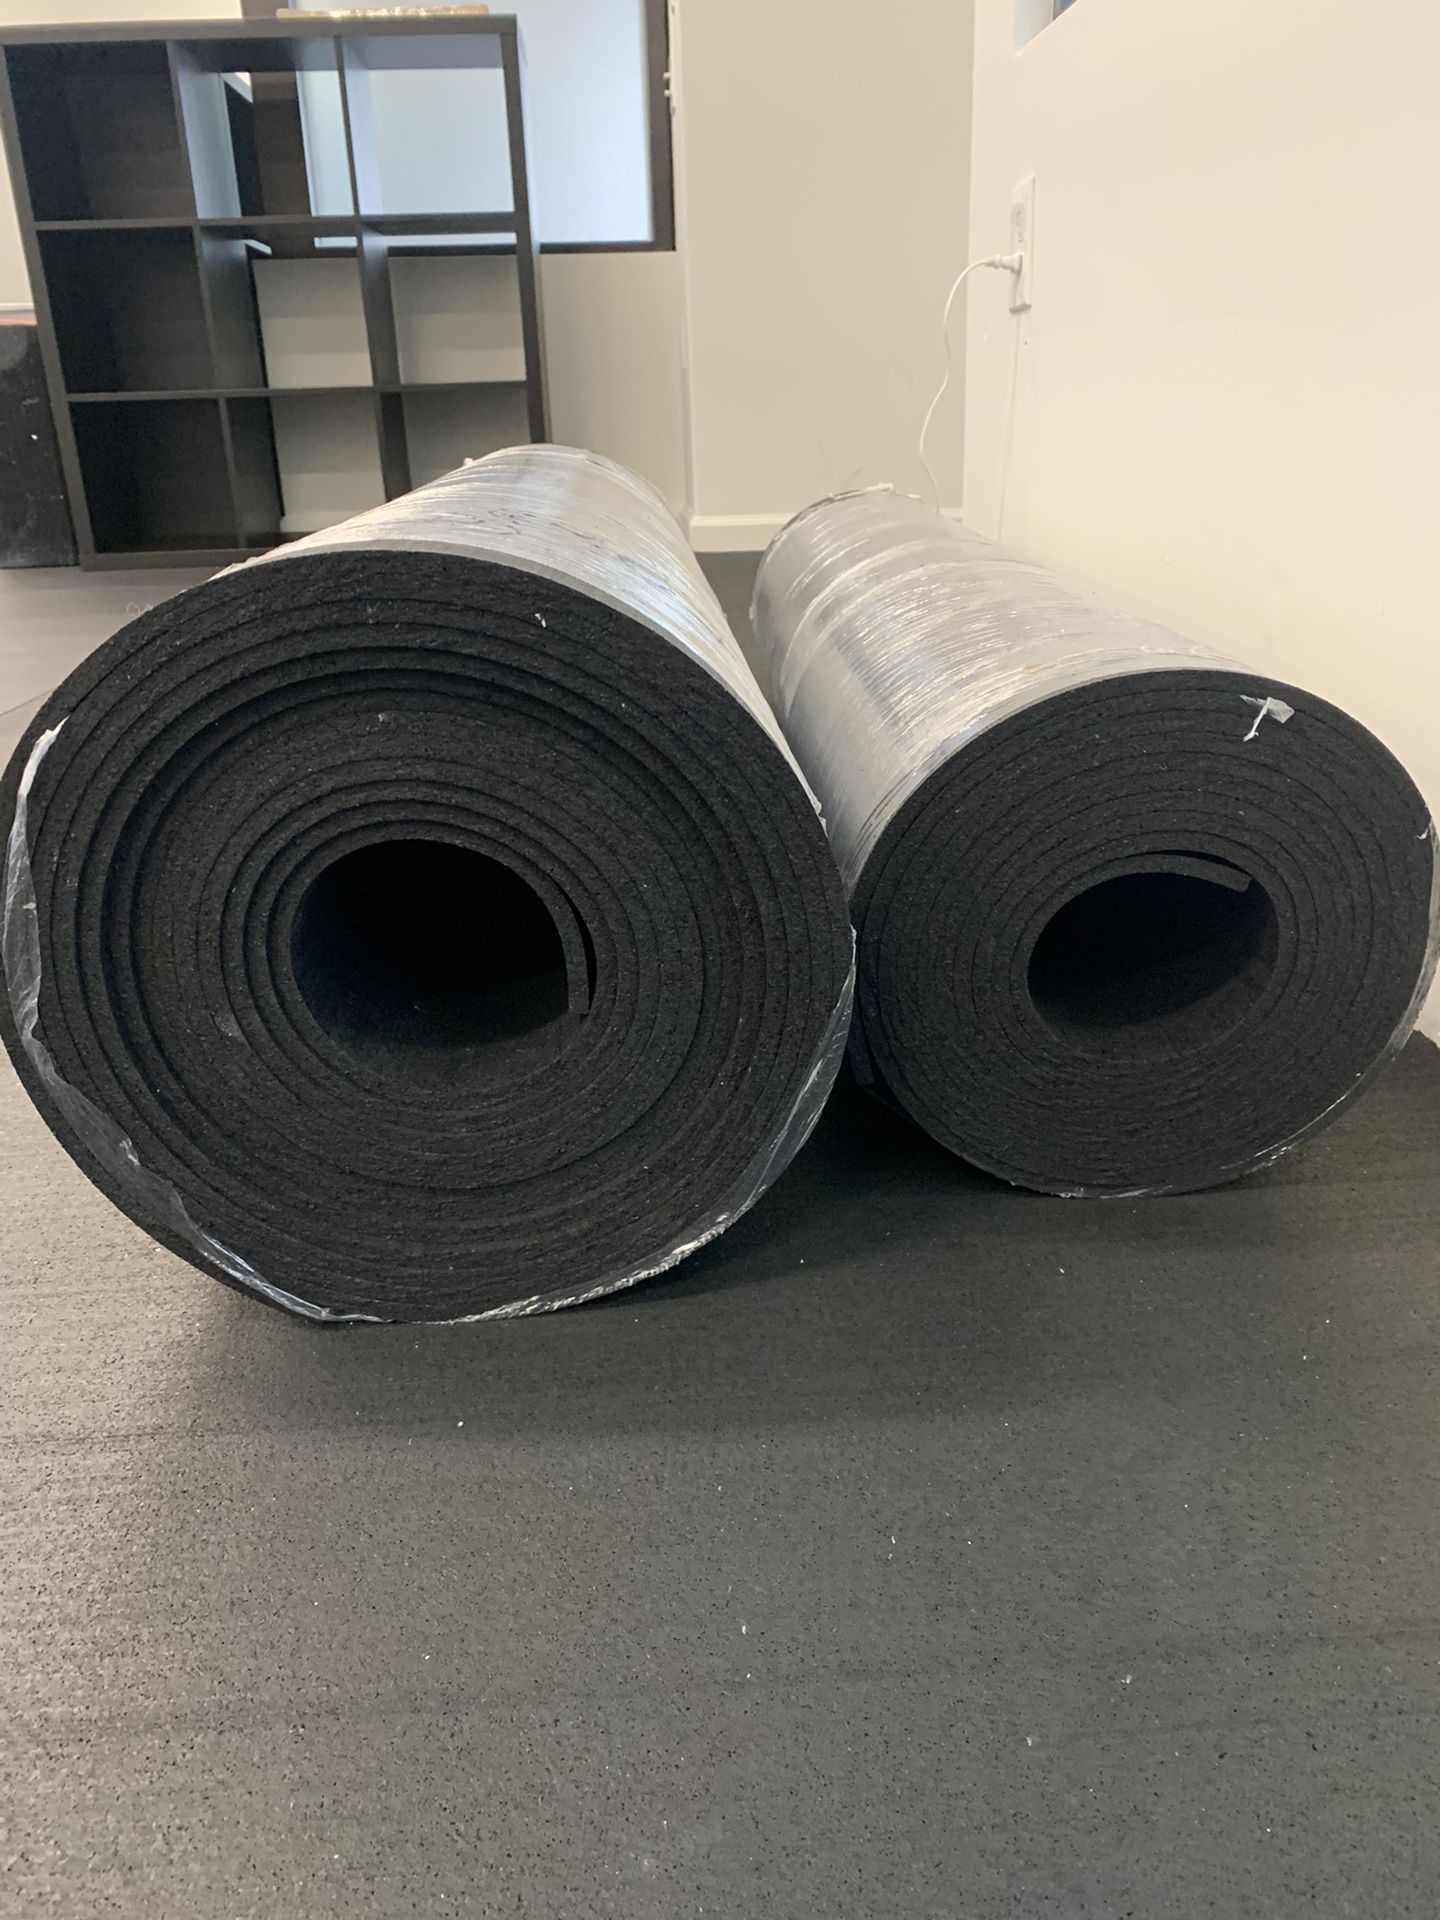 8mm Rolled rubber gym flooring